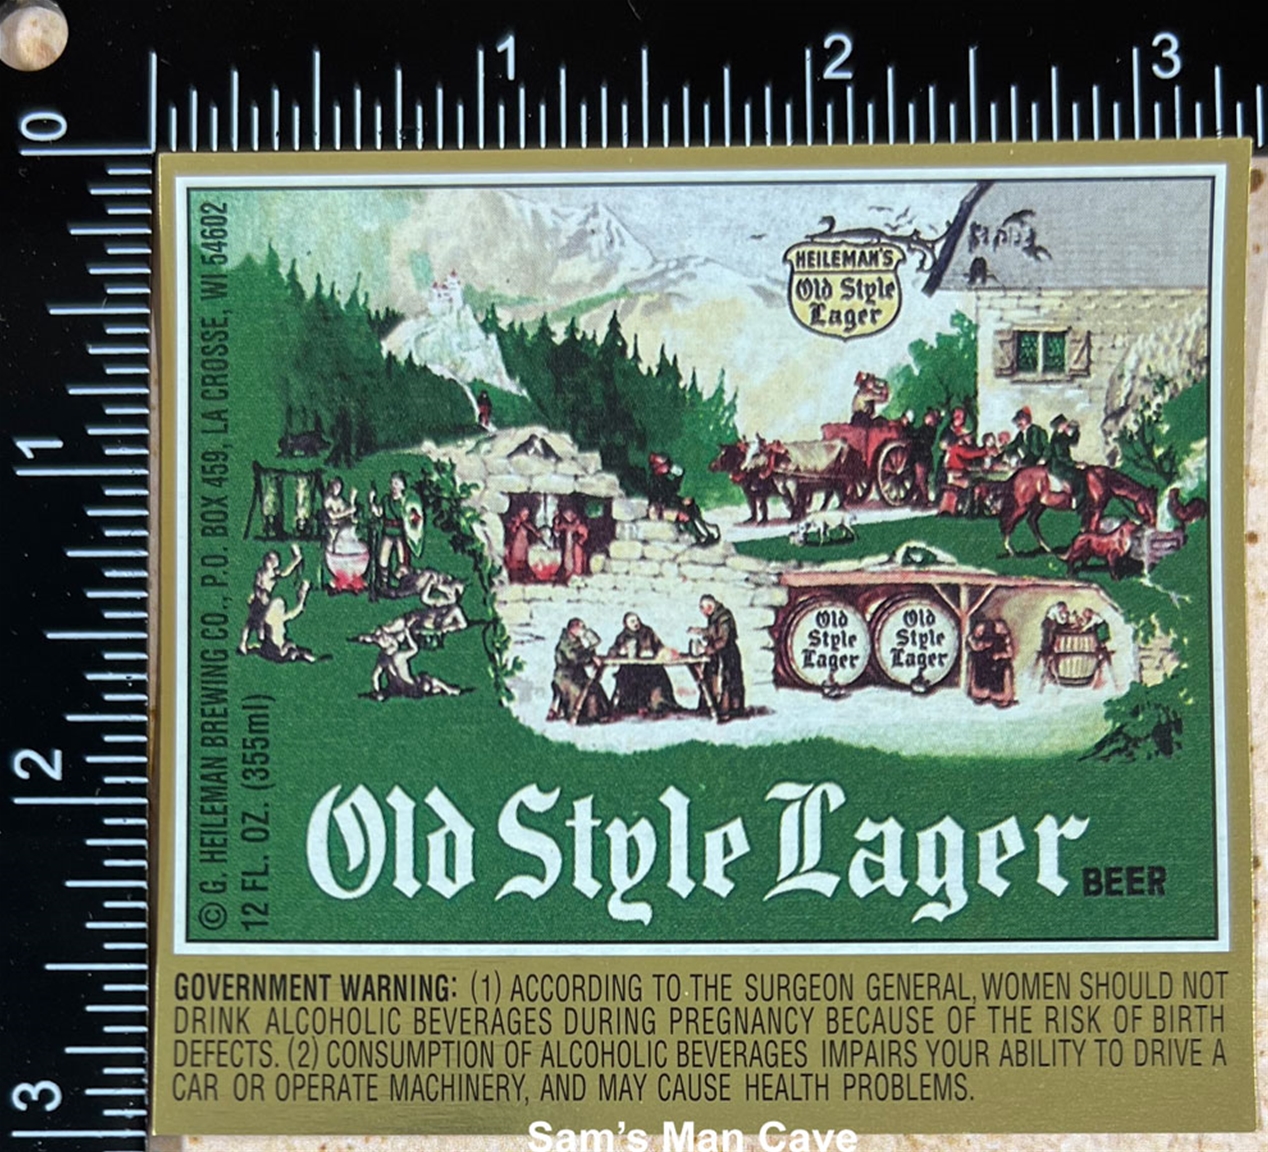 Old Style Lager Beer Label